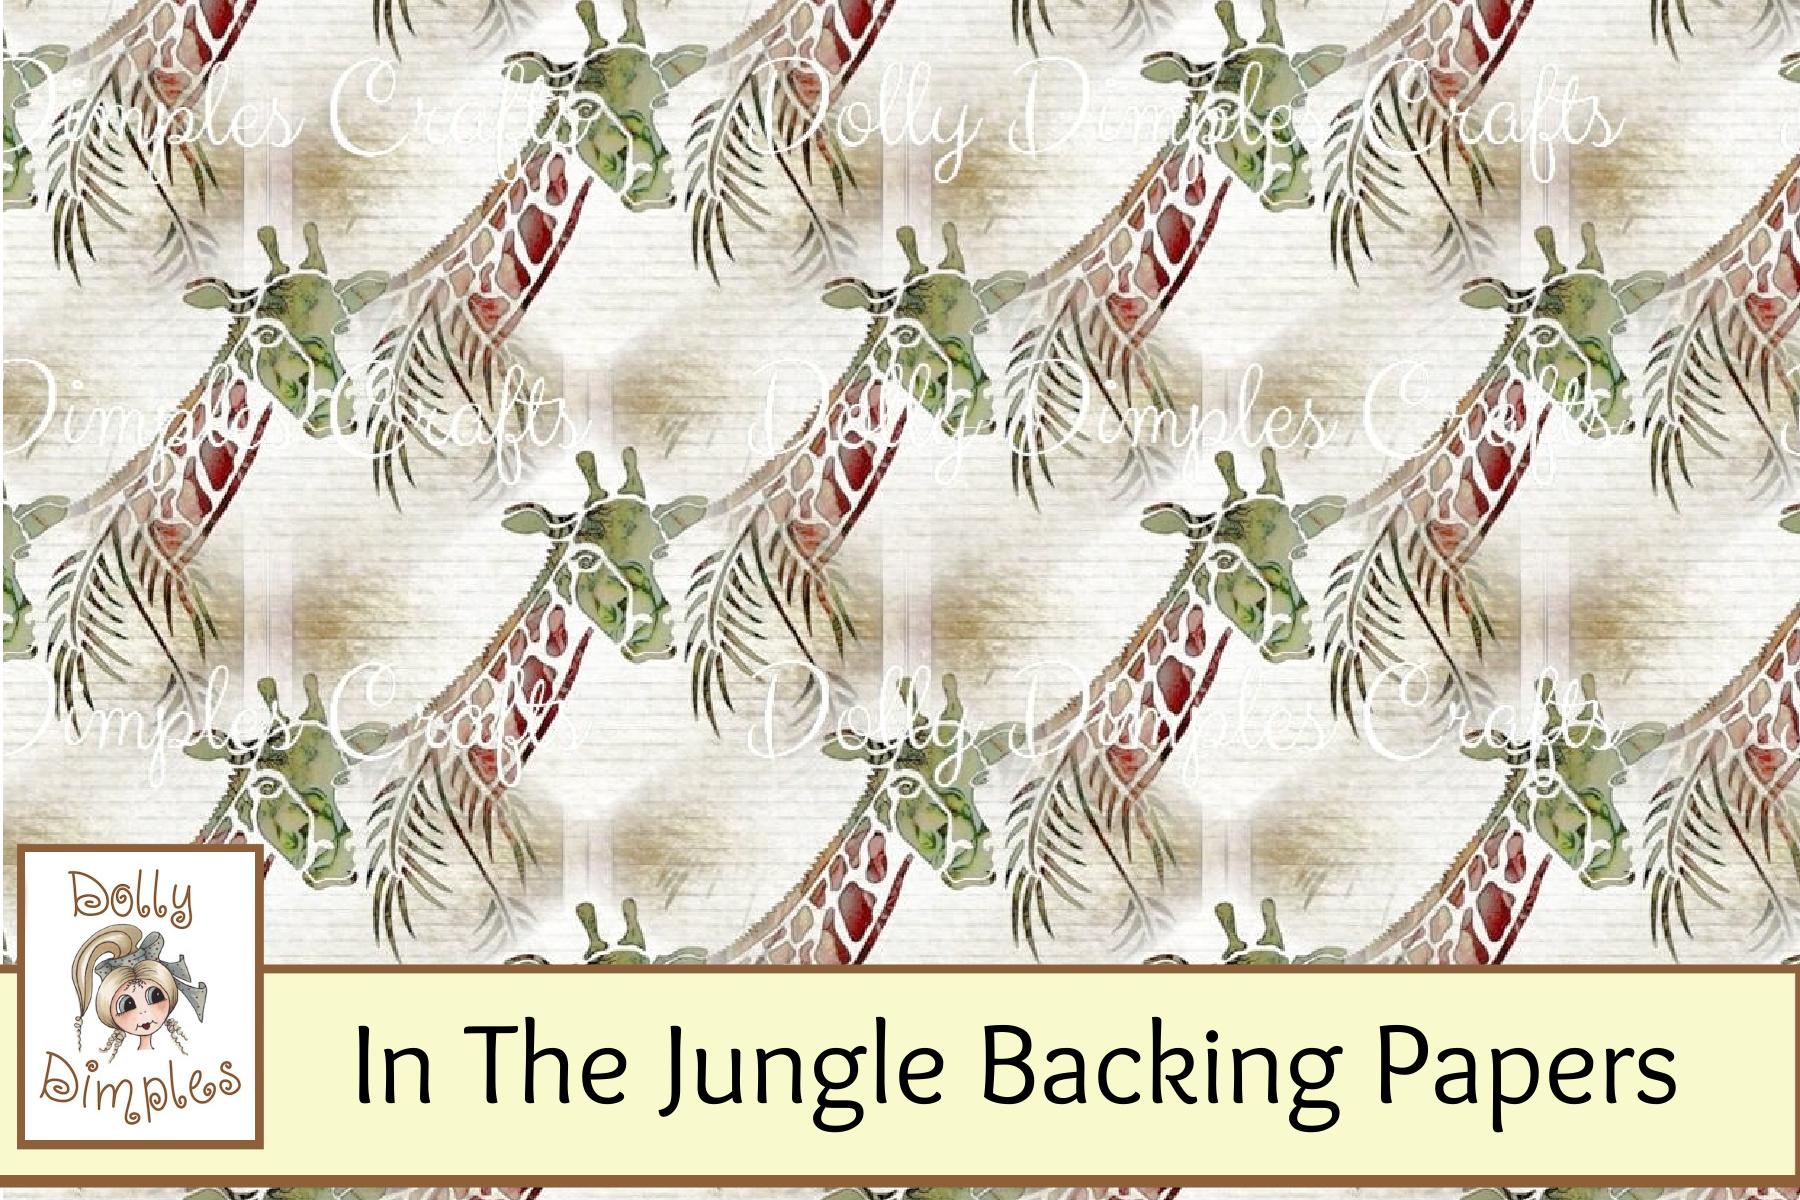 In the Jungle Backing Papers